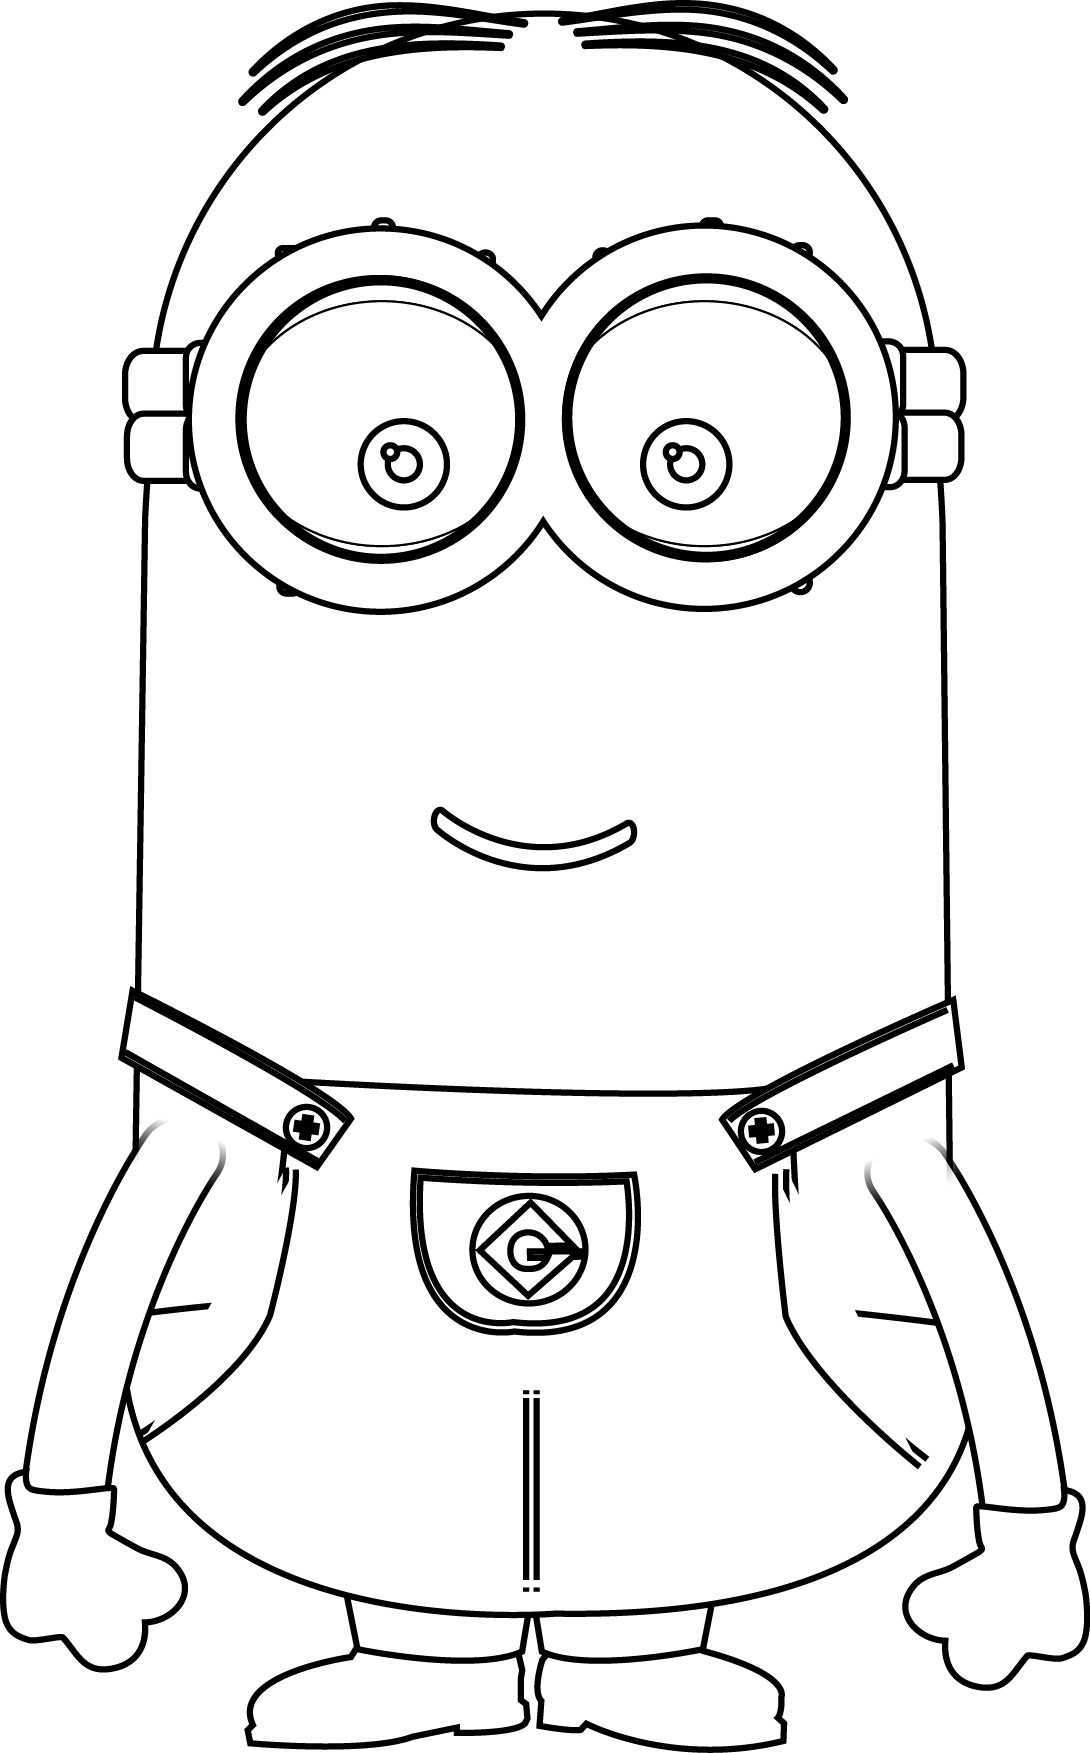 Minions Kevin Perfect Coloring Page Minion Coloring Pages Minions Coloring Pages Mini